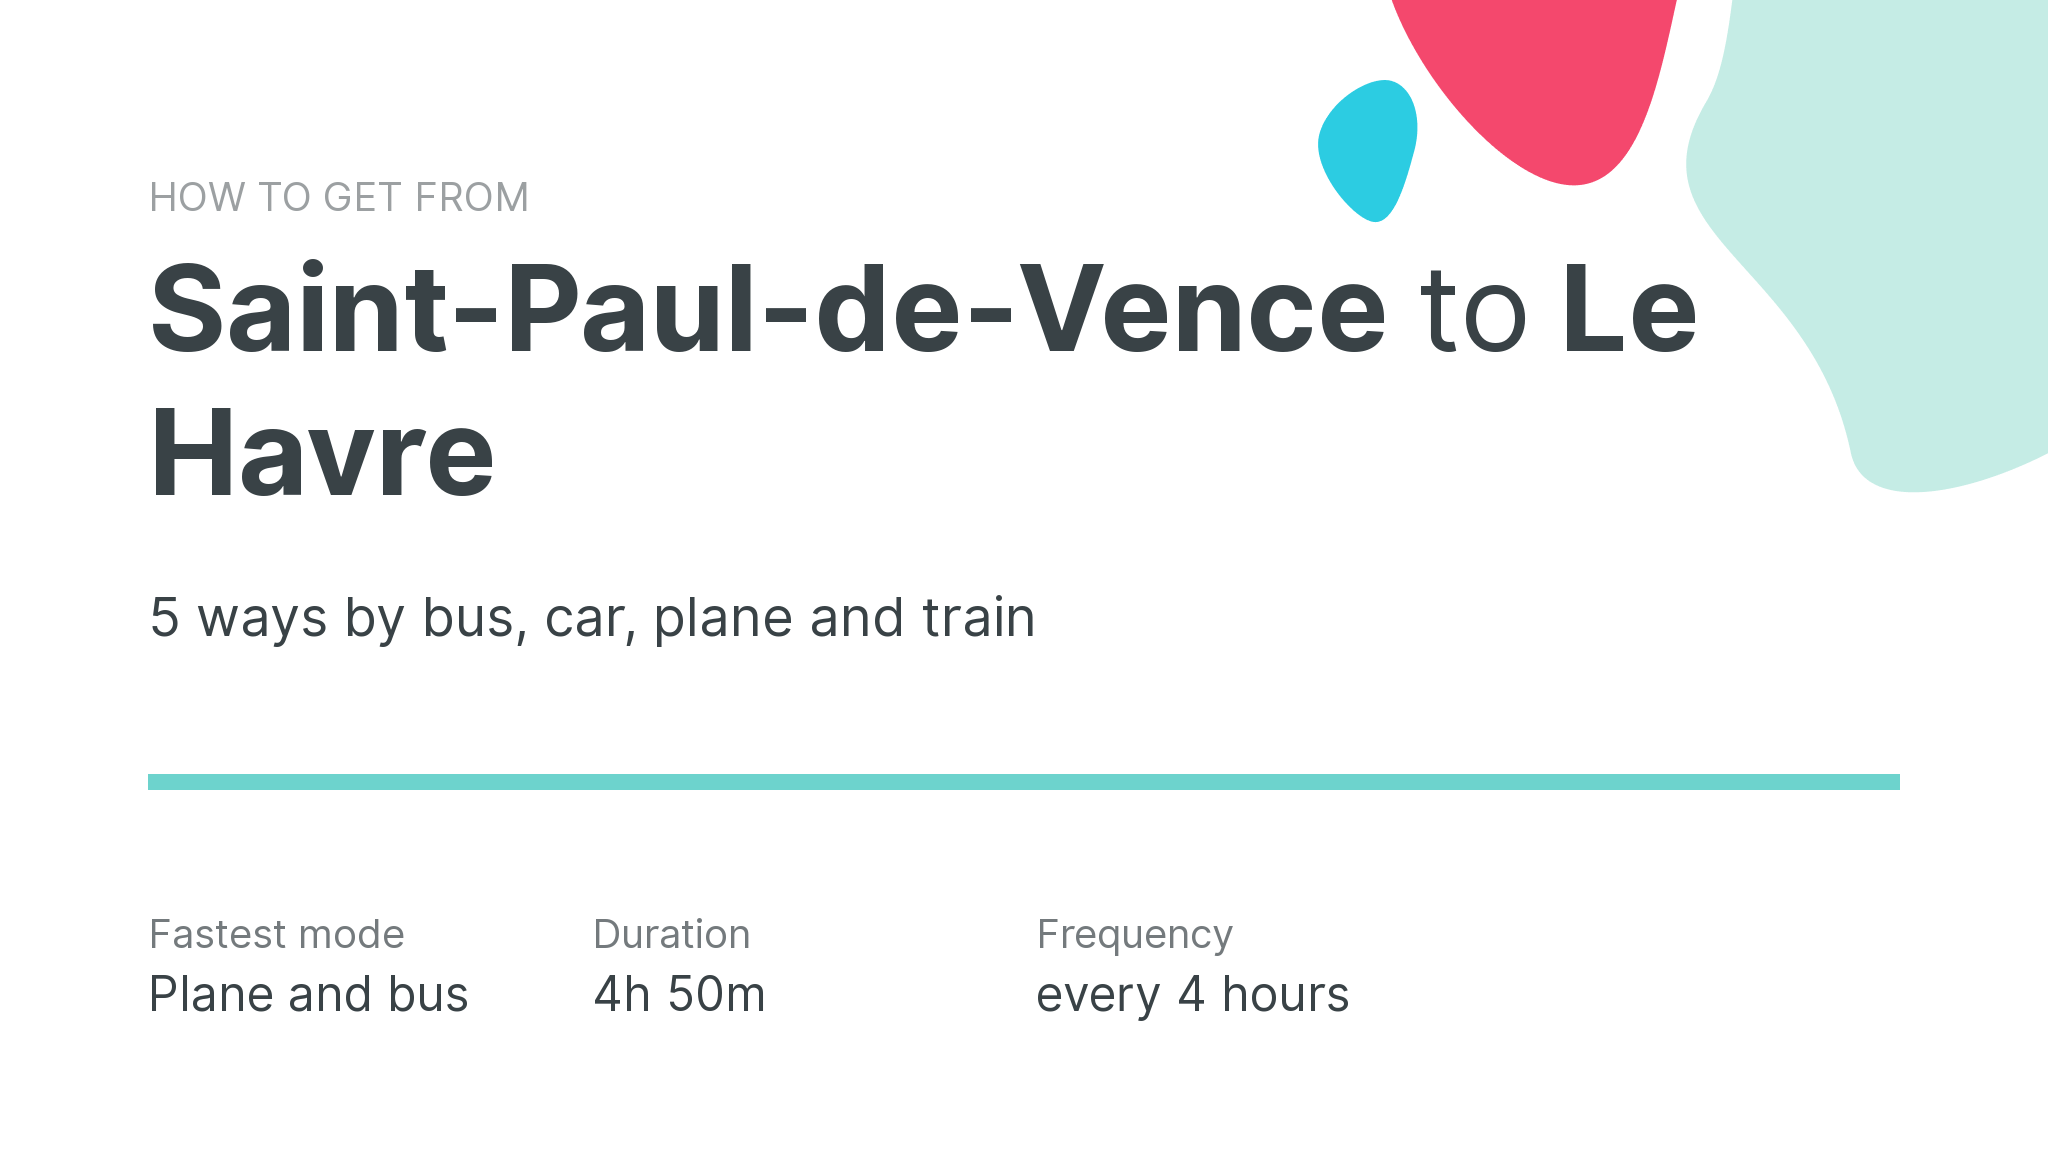 How do I get from Saint-Paul-de-Vence to Le Havre